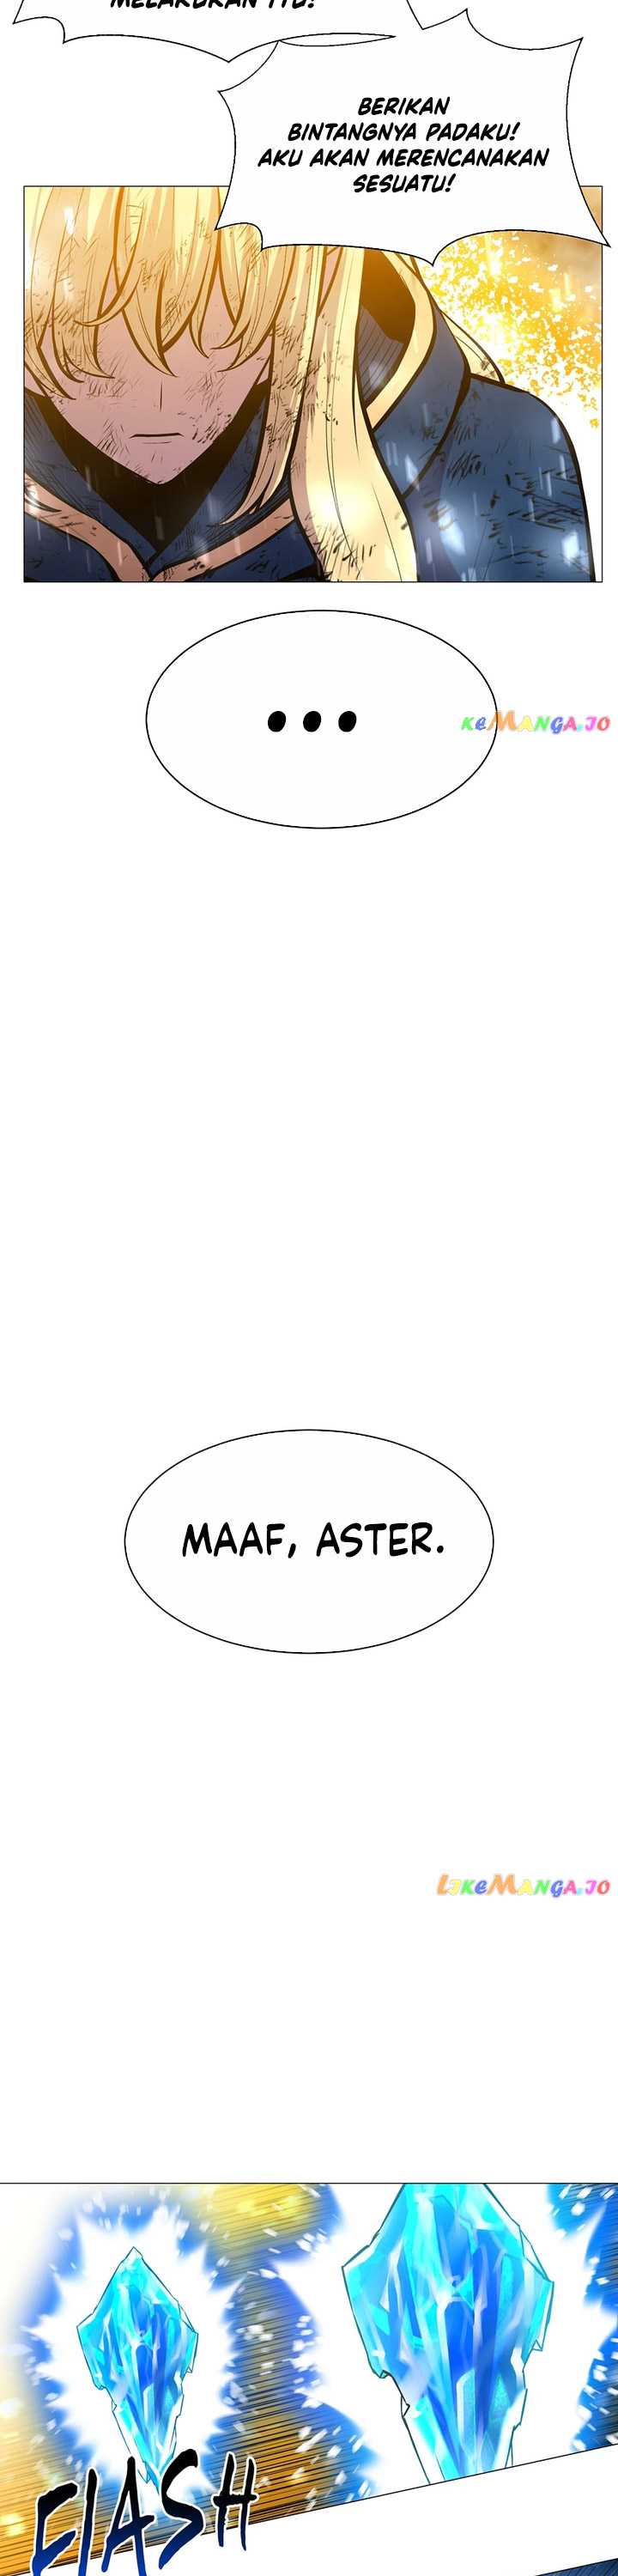 Updater Chapter 118